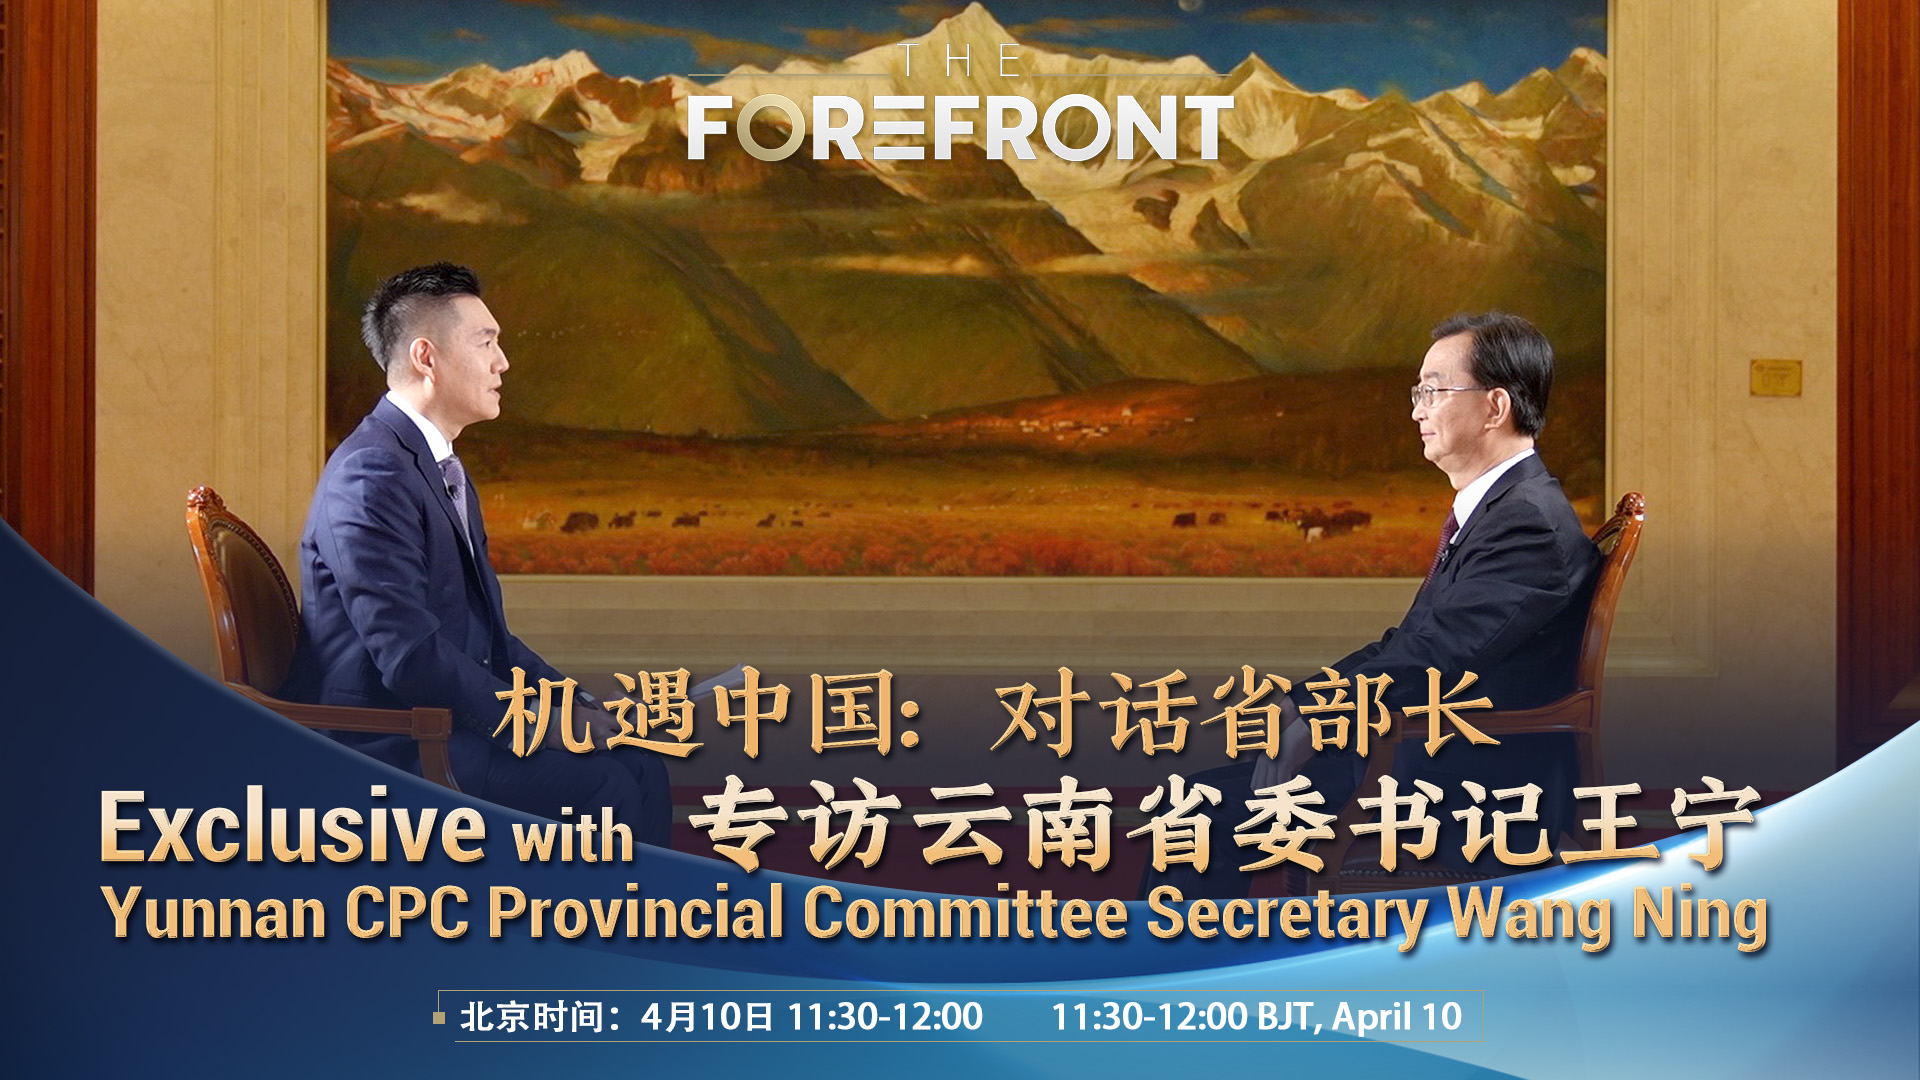 Watch: Exclusive with Yunnan CPC Provincial Committee Secretary Wang Ning